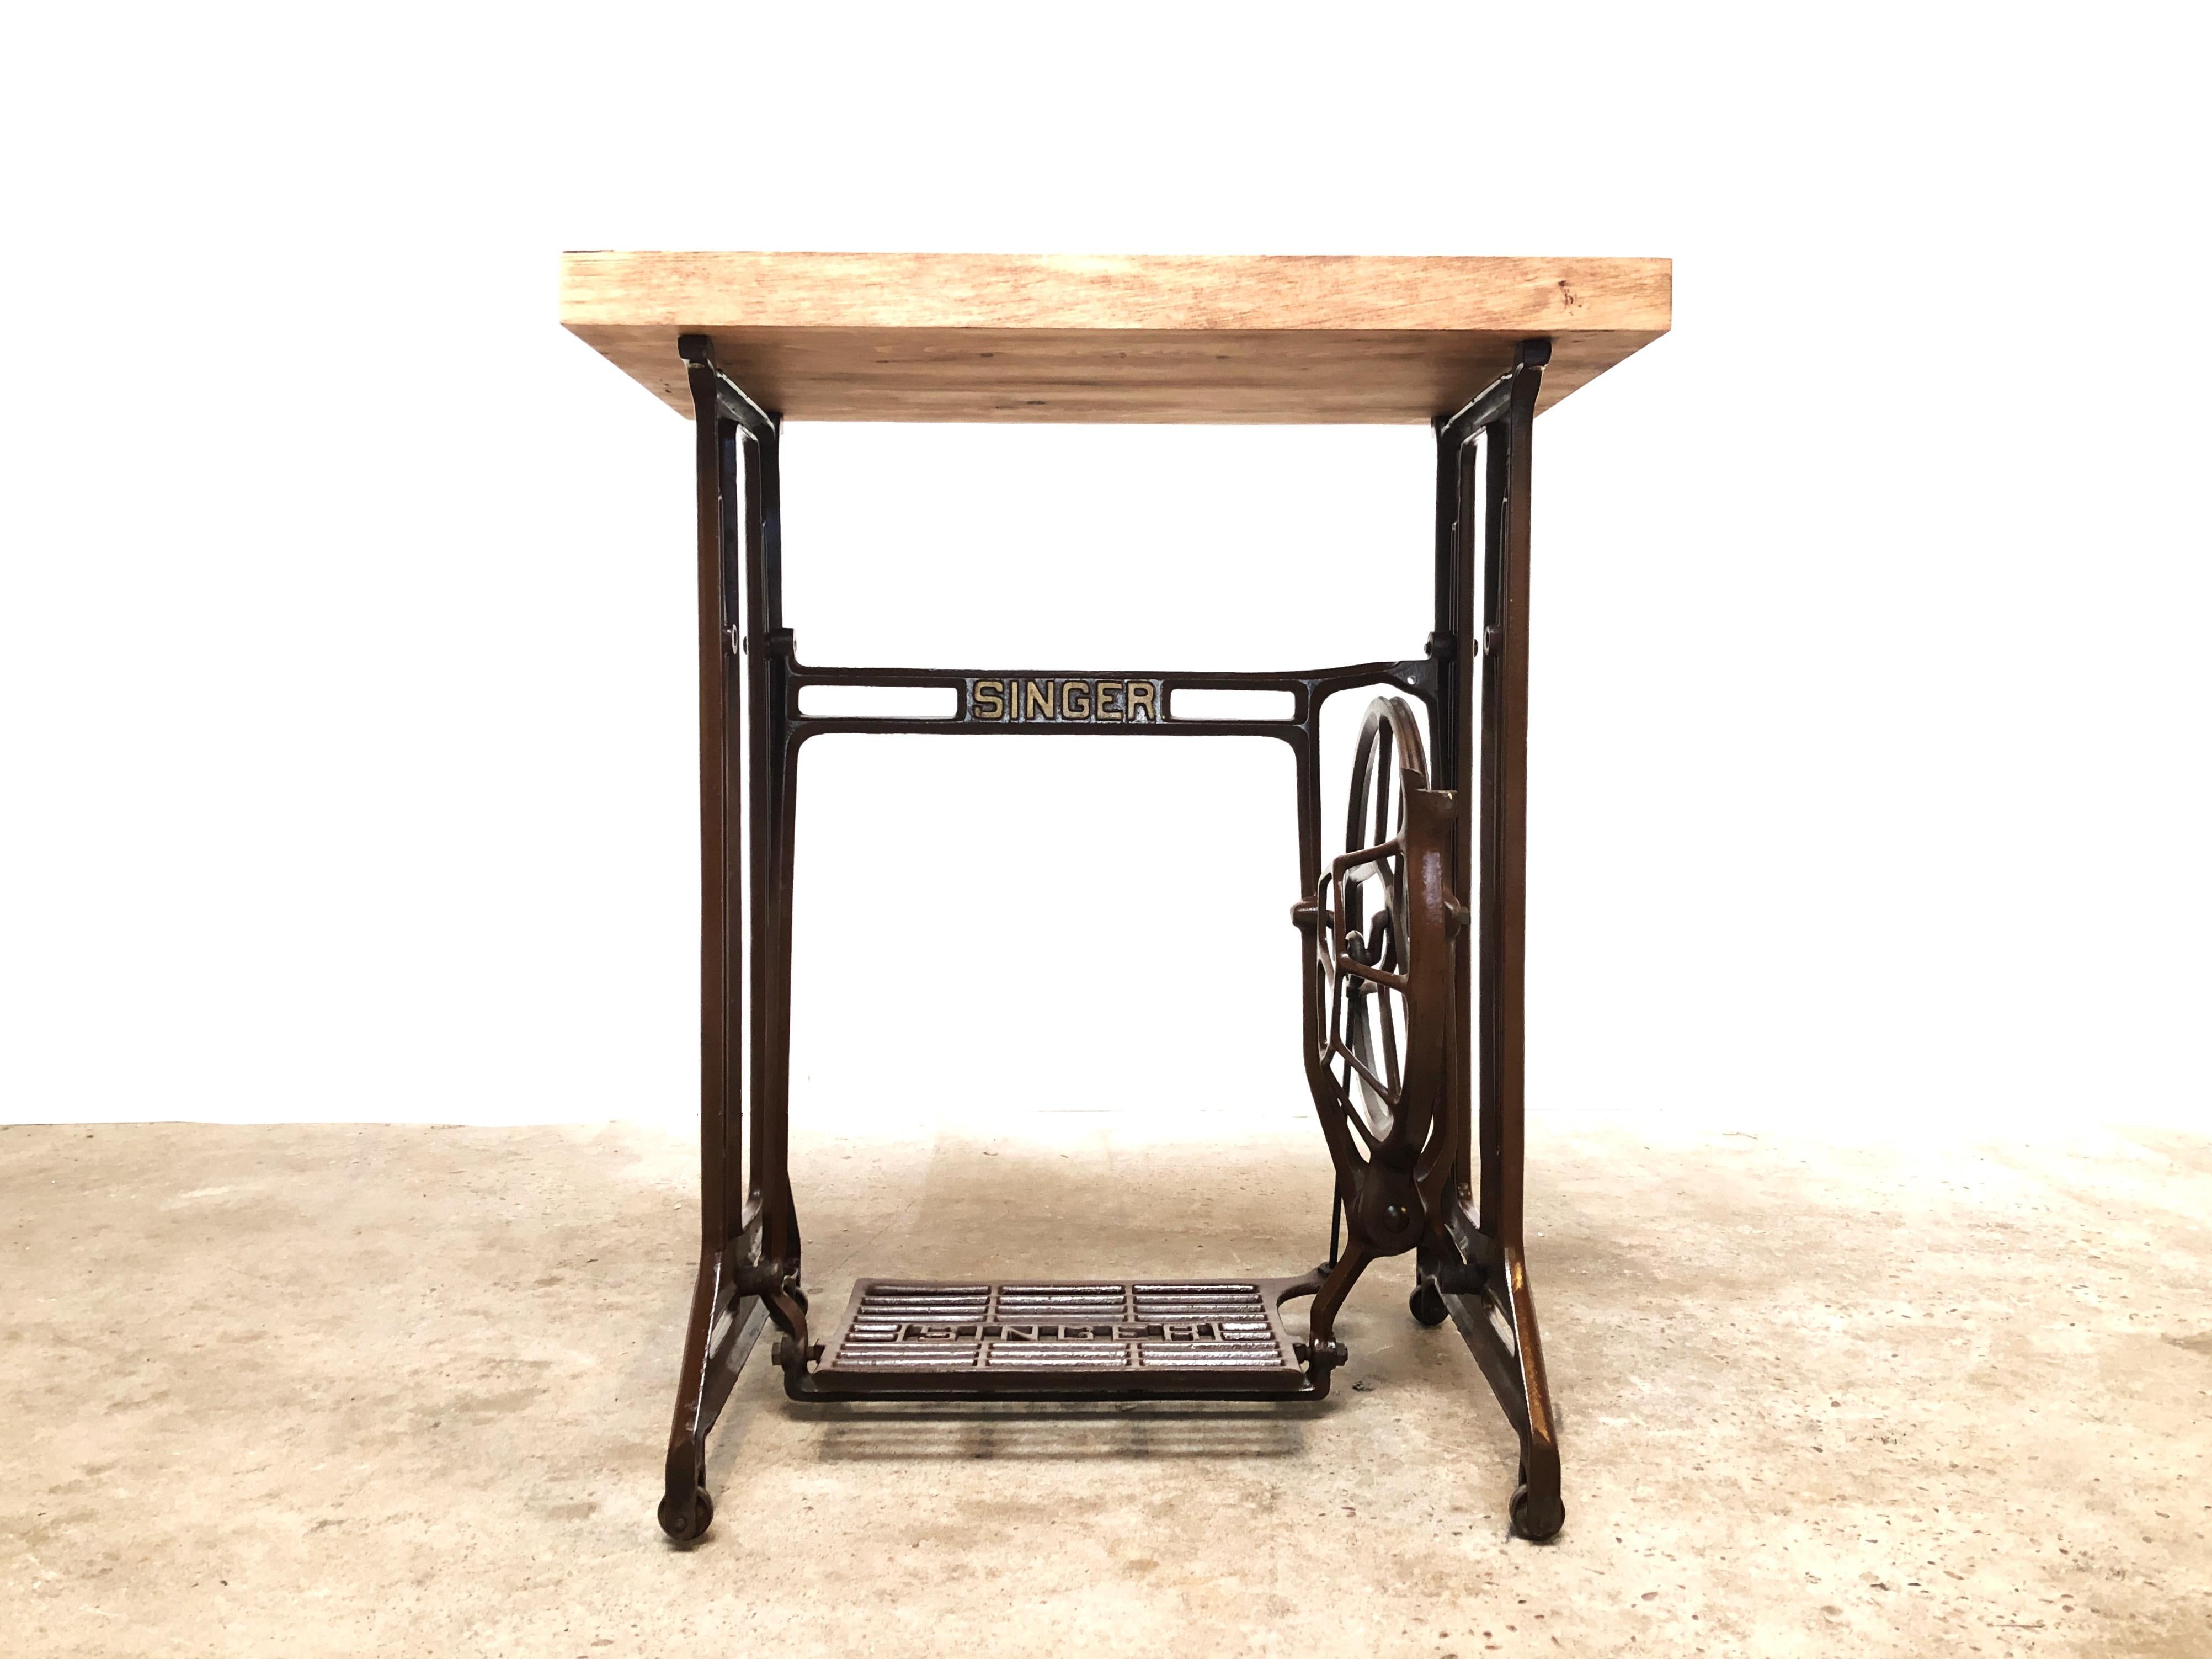 An original Singer sewing machine treadle stand with a reclaimed wood top.

High-quality metal stand from the 1930s. Made by the Singer Manufacturing Company, in the Kilbowie factory, Clydebank, Scotand.

The fitted reclaimed top has been waxed